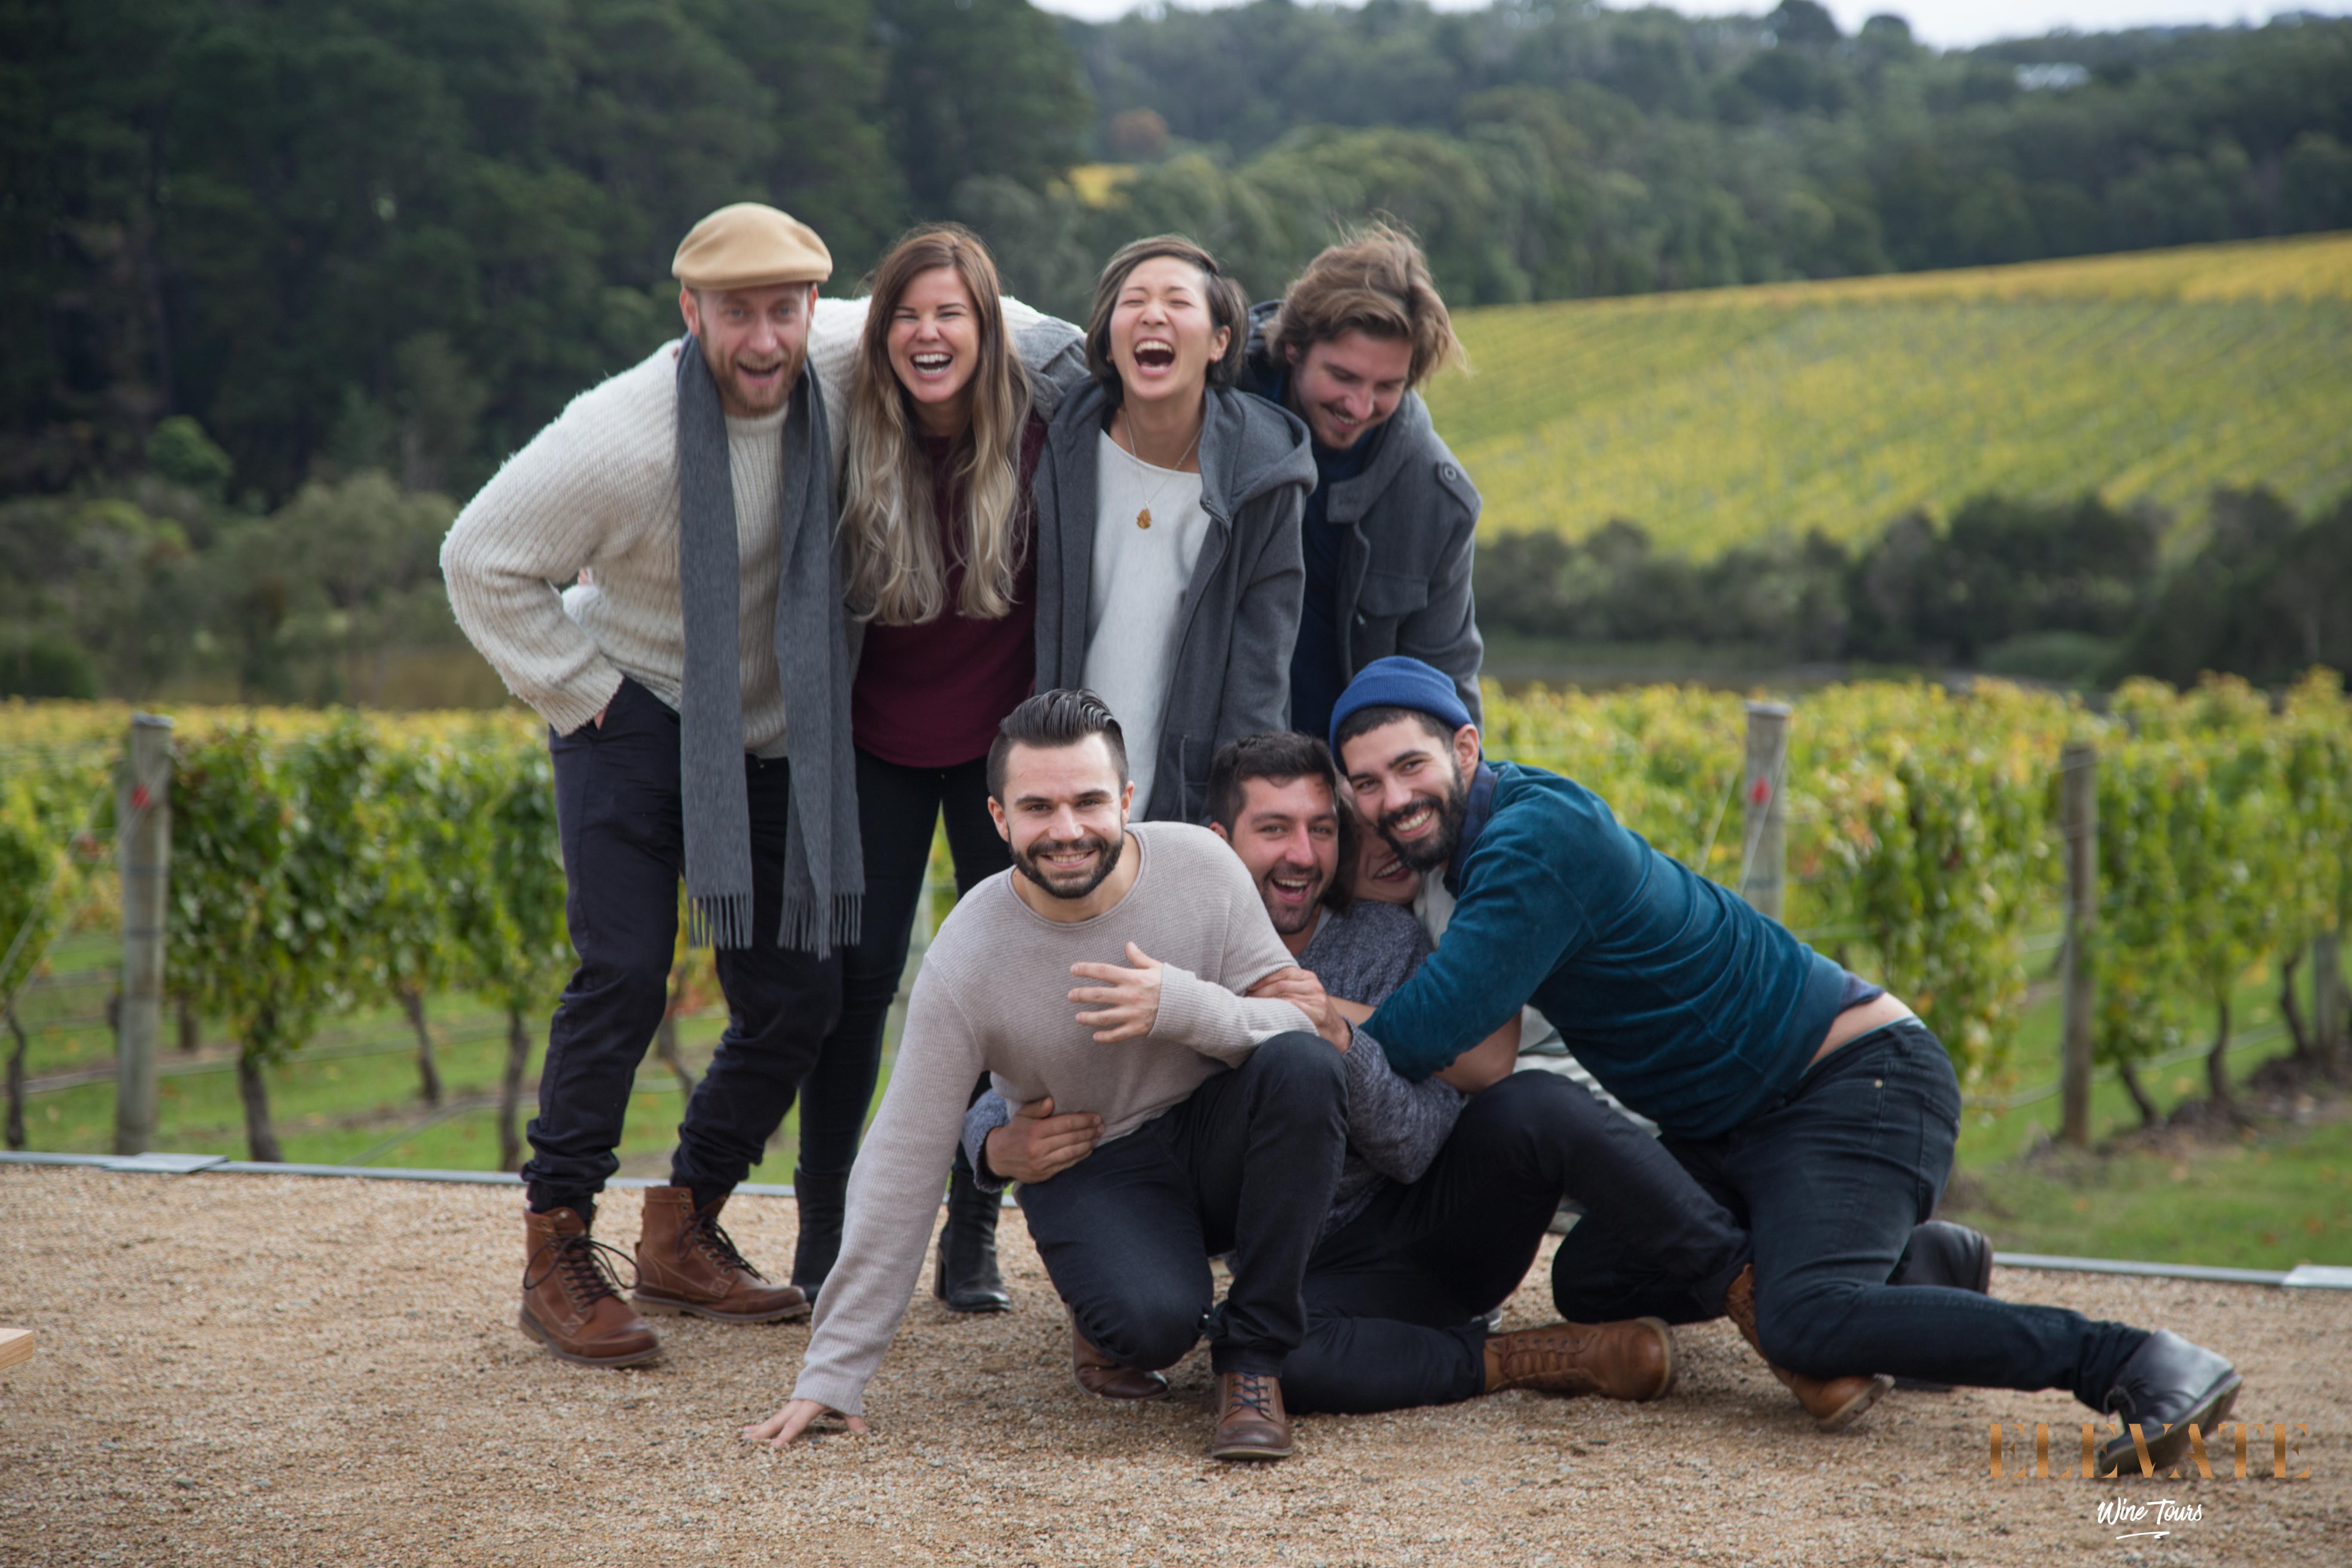 Group Photo in front of the vines at Rare Hare on the Mornington Peninsula